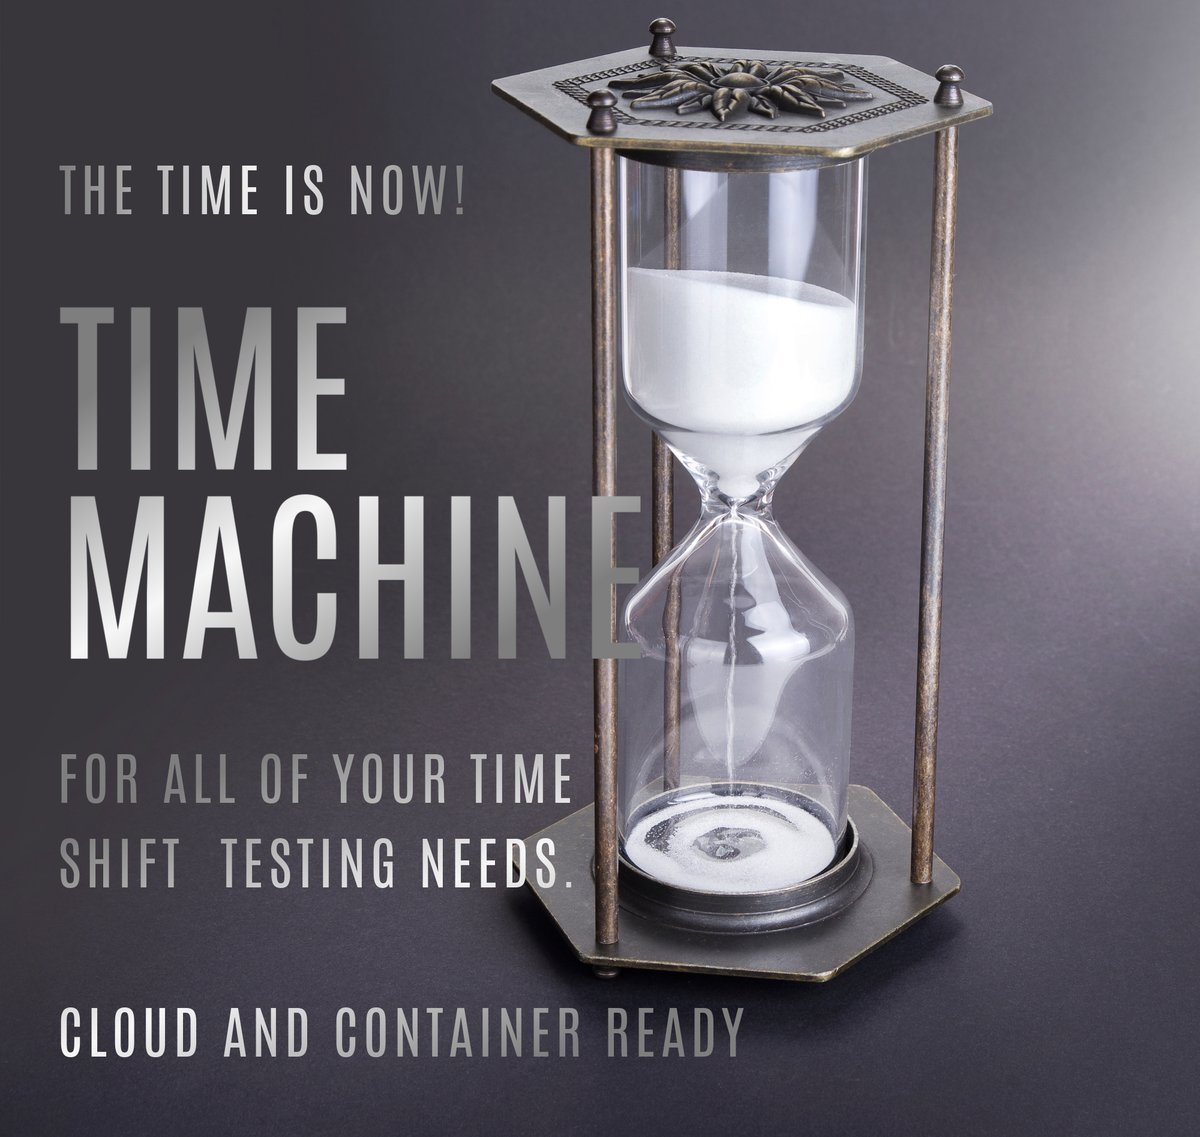 Check out our new blog on Migrating to Microservices Architecture with Time Machine. solution-soft.com/content/migrat… #containerization #testautomation #softwaretesting #cloudmigration